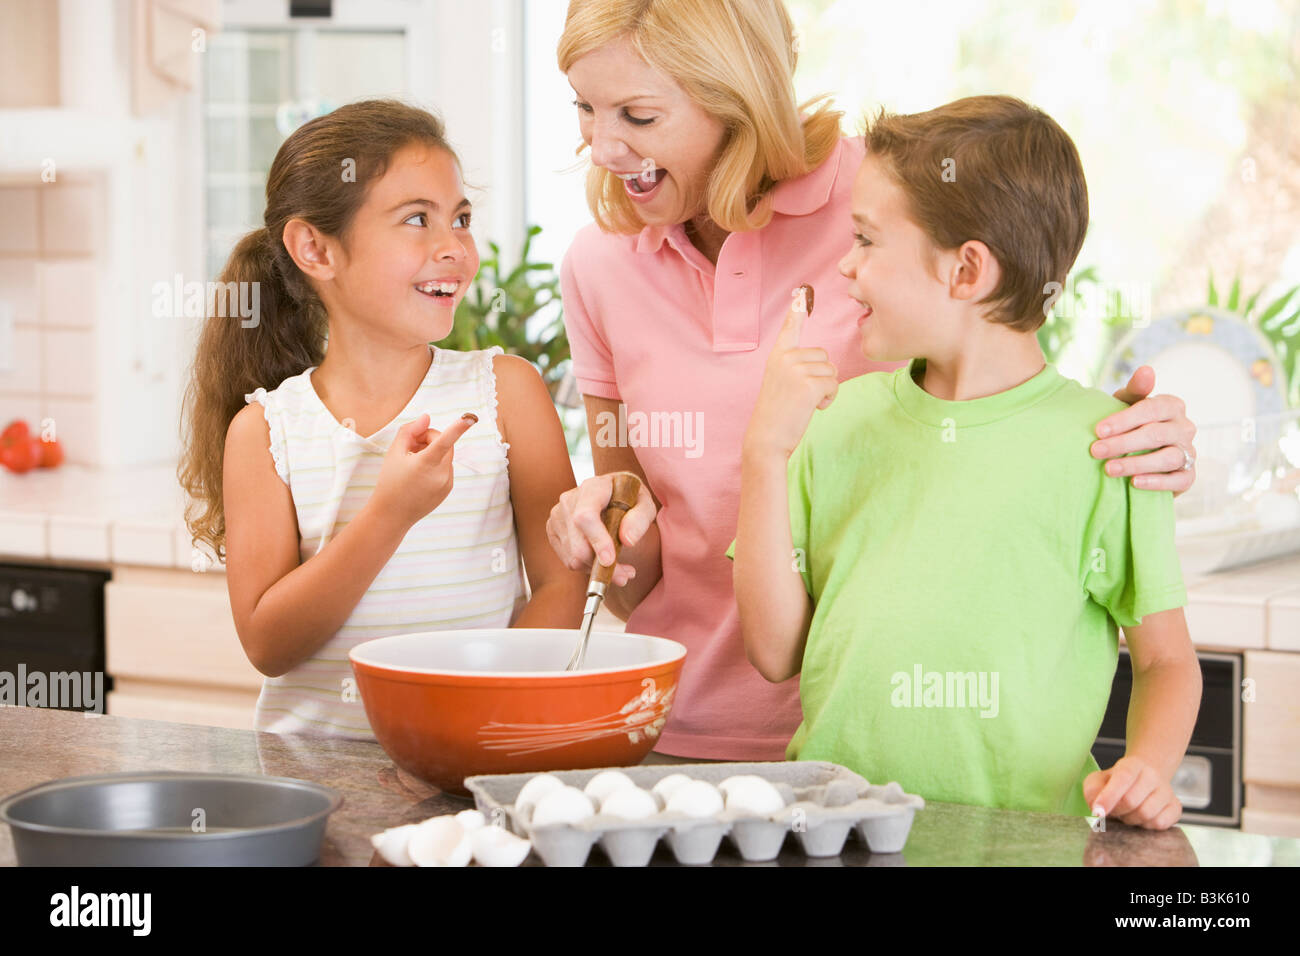 Woman and two children in kitchen baking and smiling Stock Photo